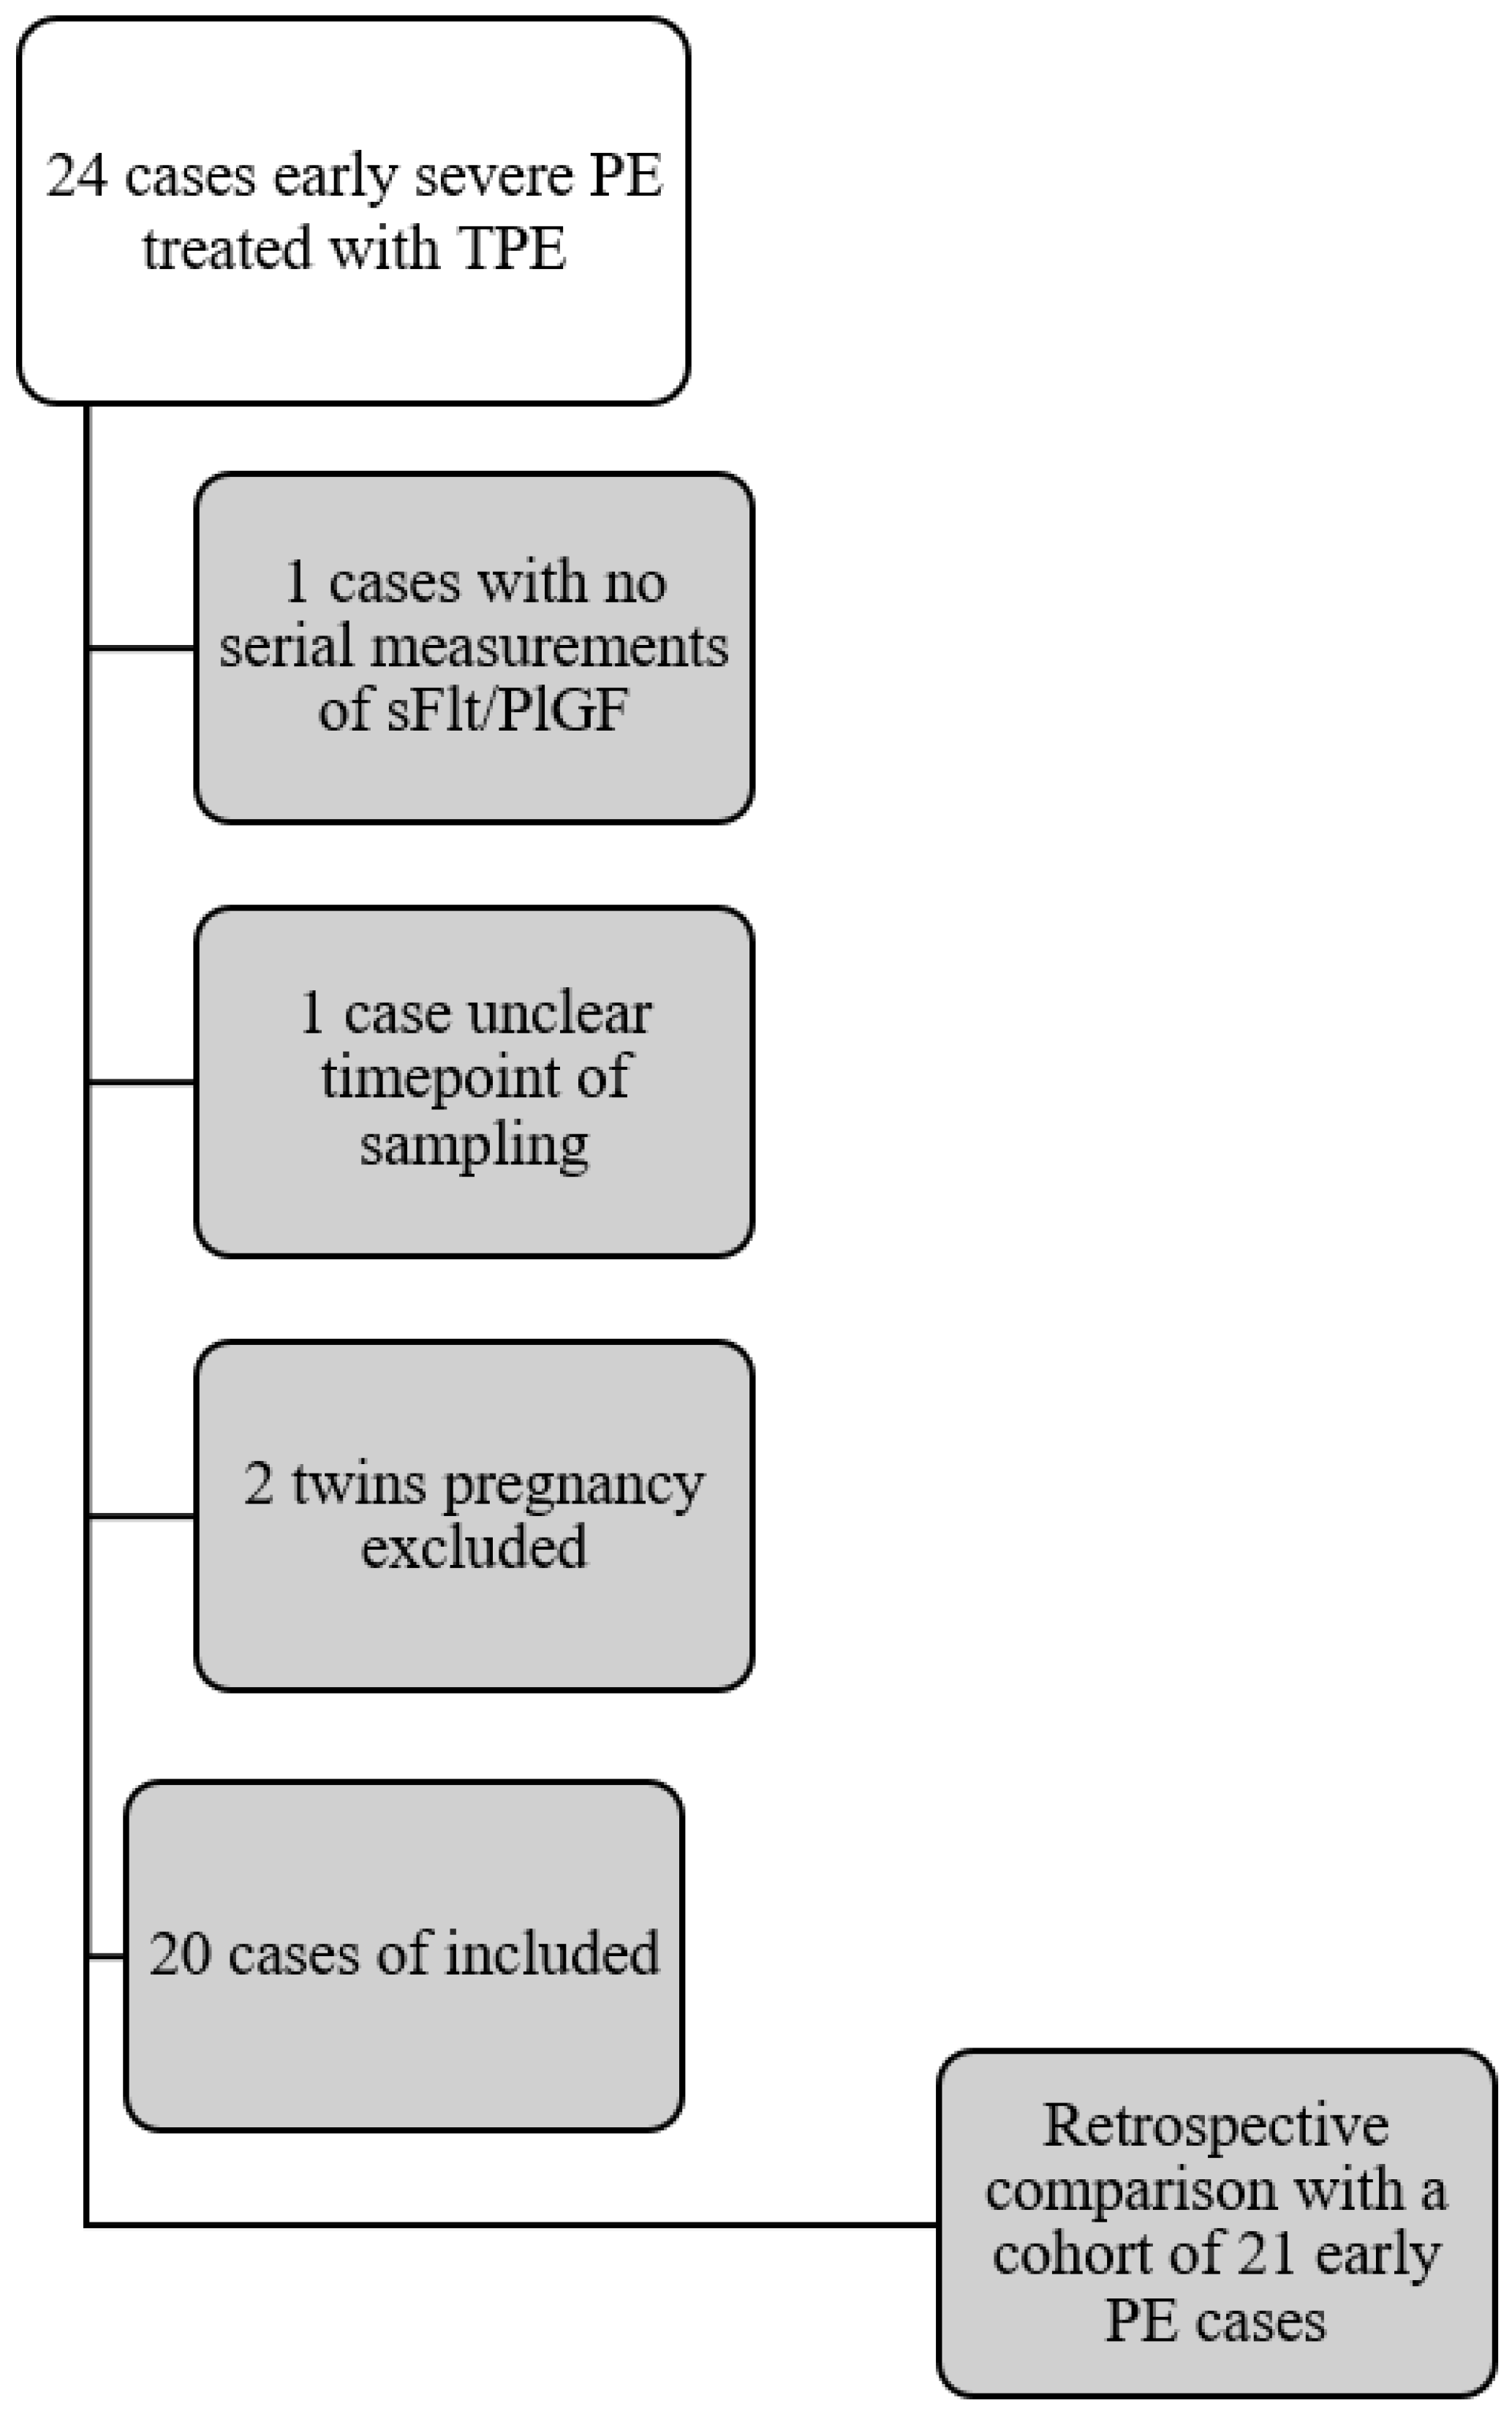 Comparison of maternal outcome in patients treated with methyldopa